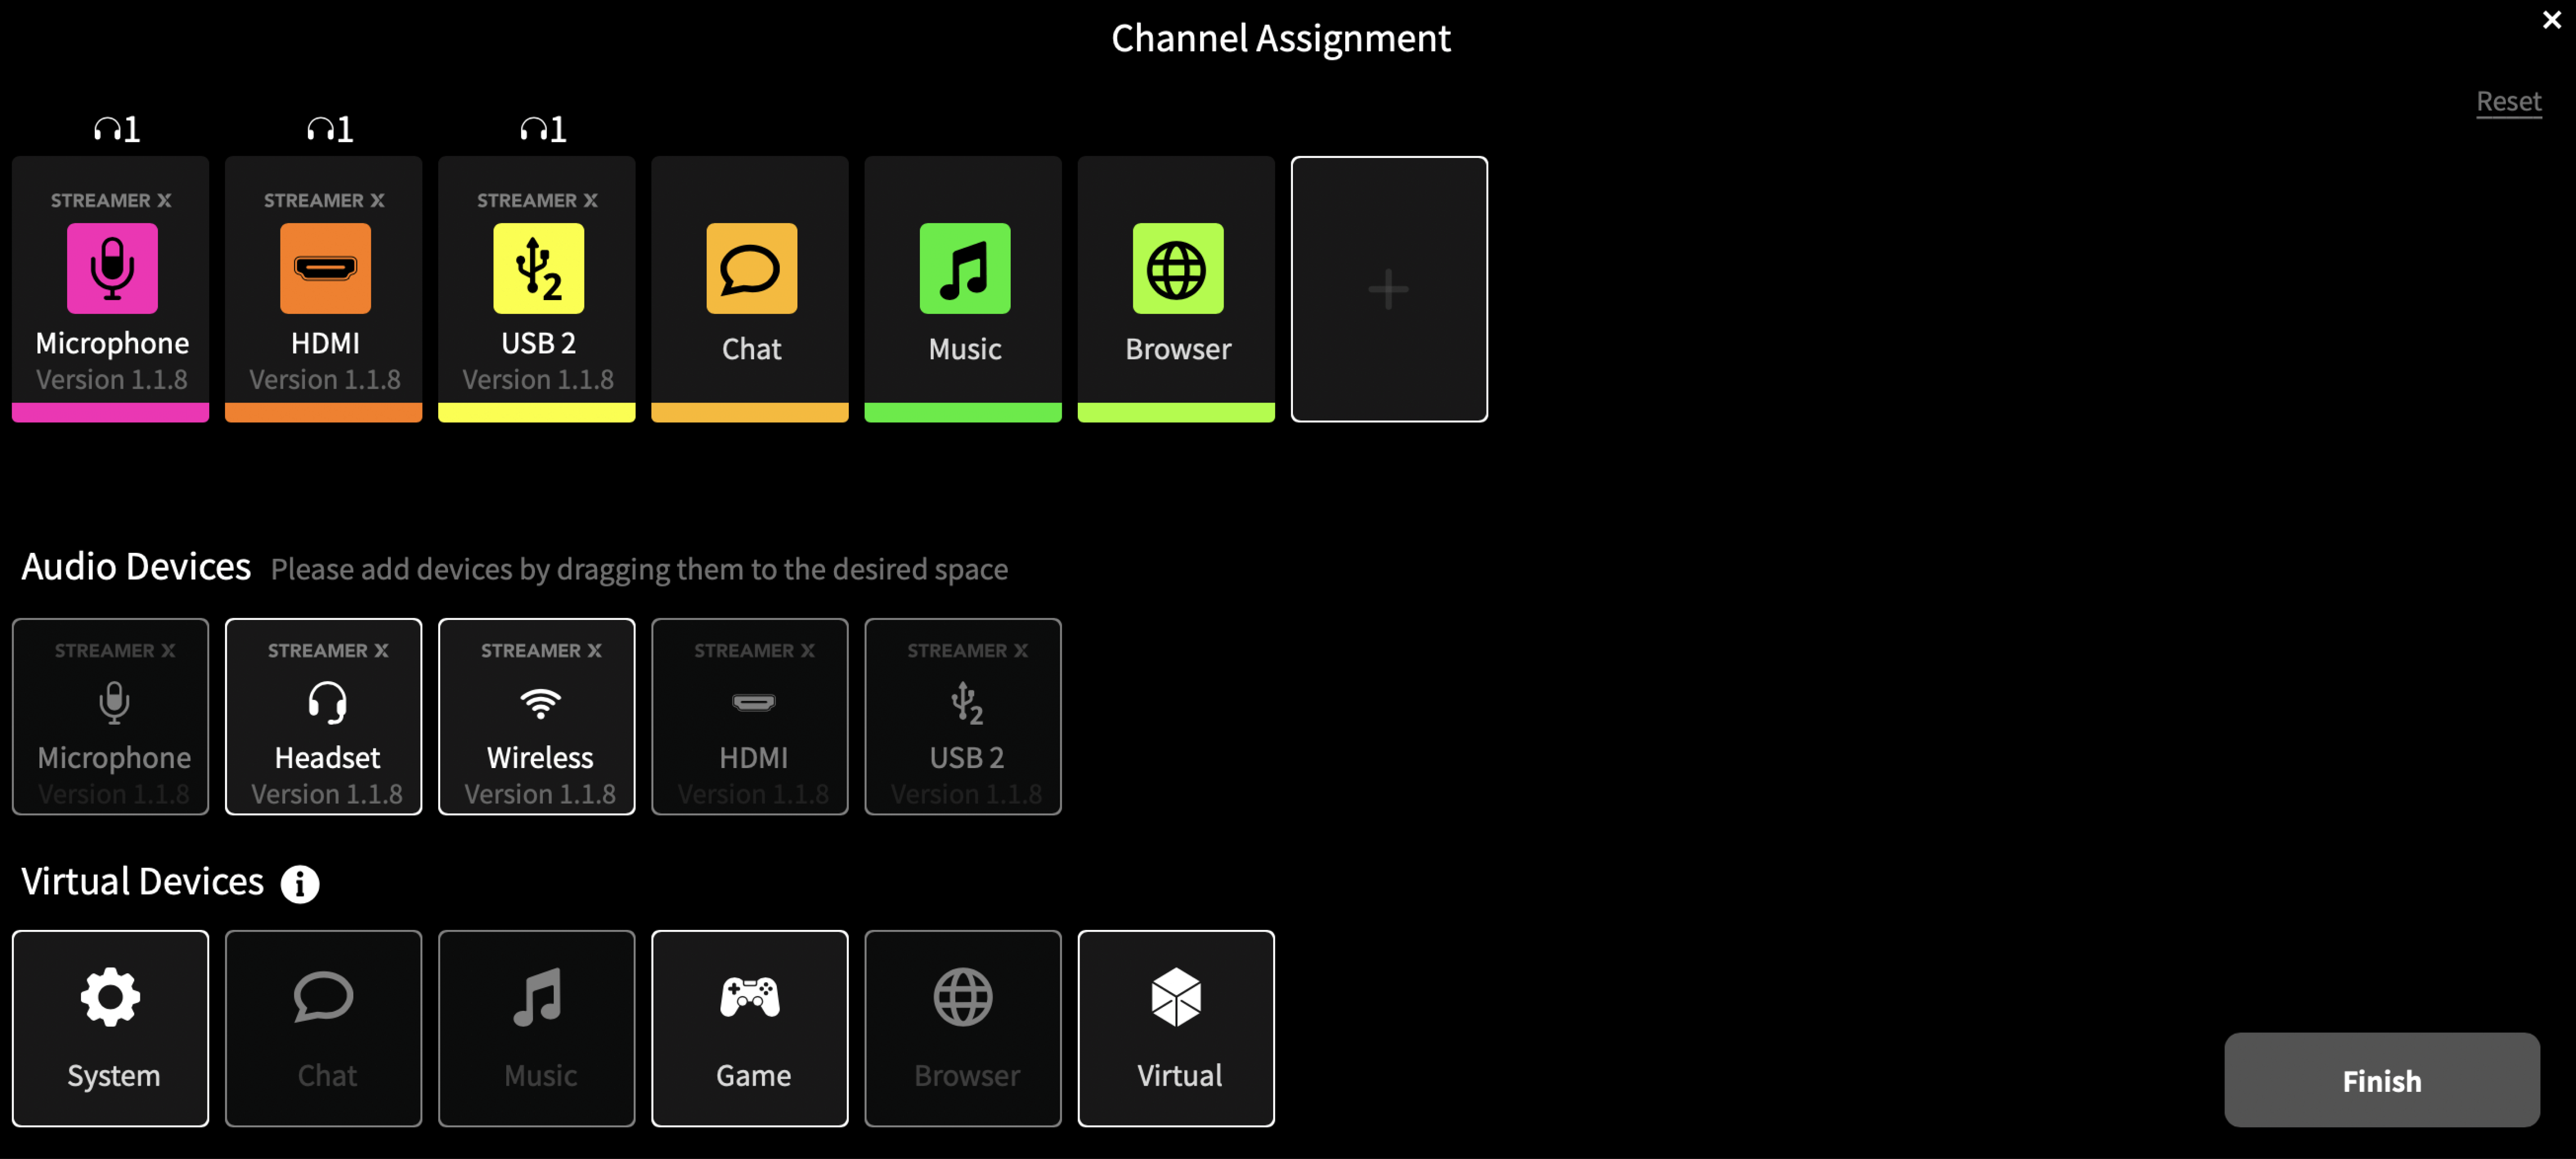 UNIFY channel assignment menu